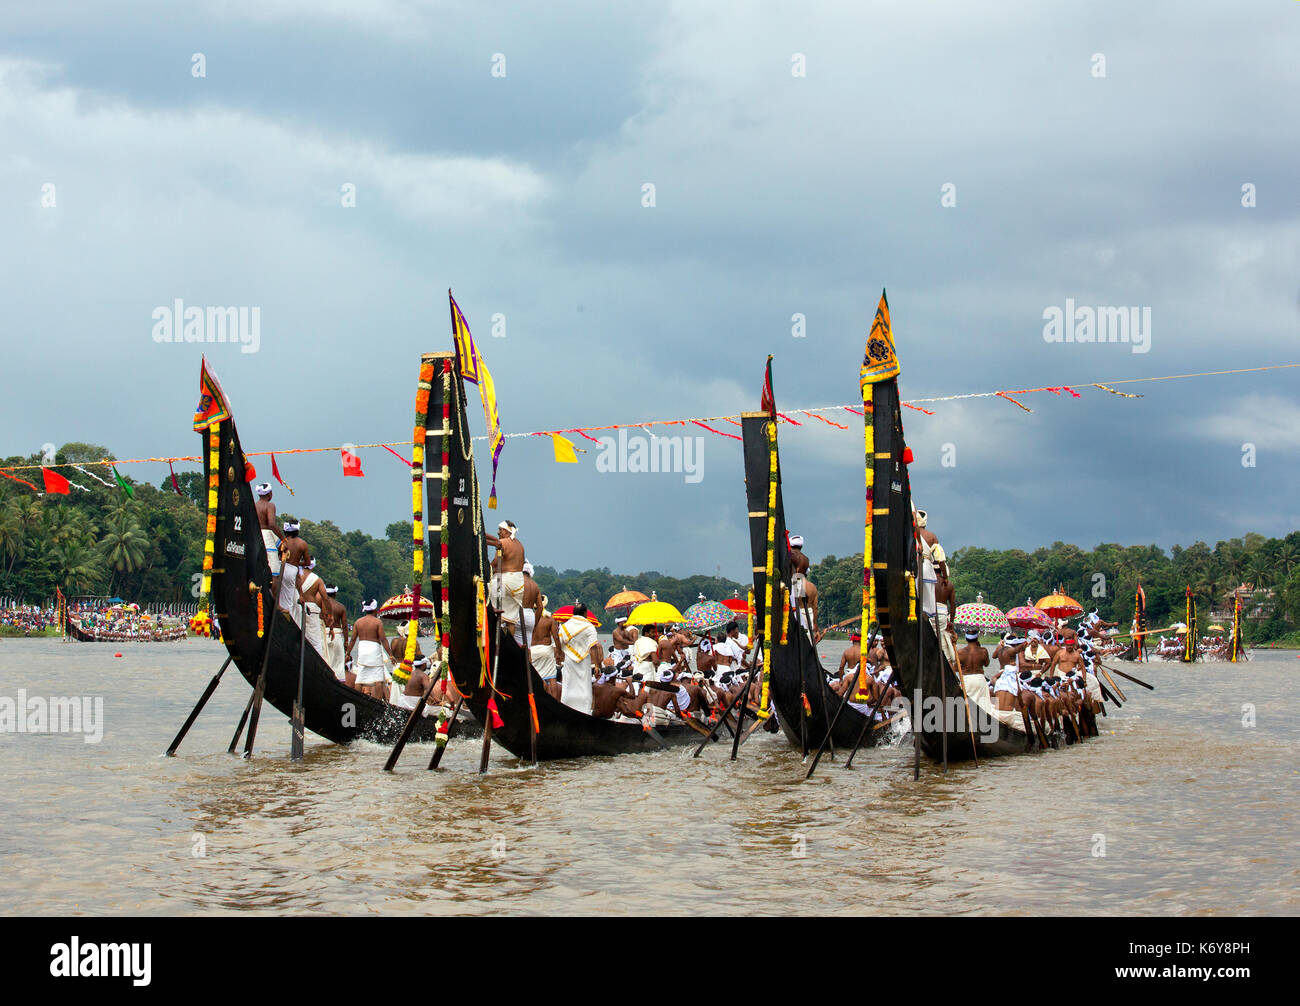 decorated boats also called palliyodam and rowers from Aranmula Boat Race,the oldest river boat fiesta in Kerala,Aranmula,snake boat race,india Stock Photo